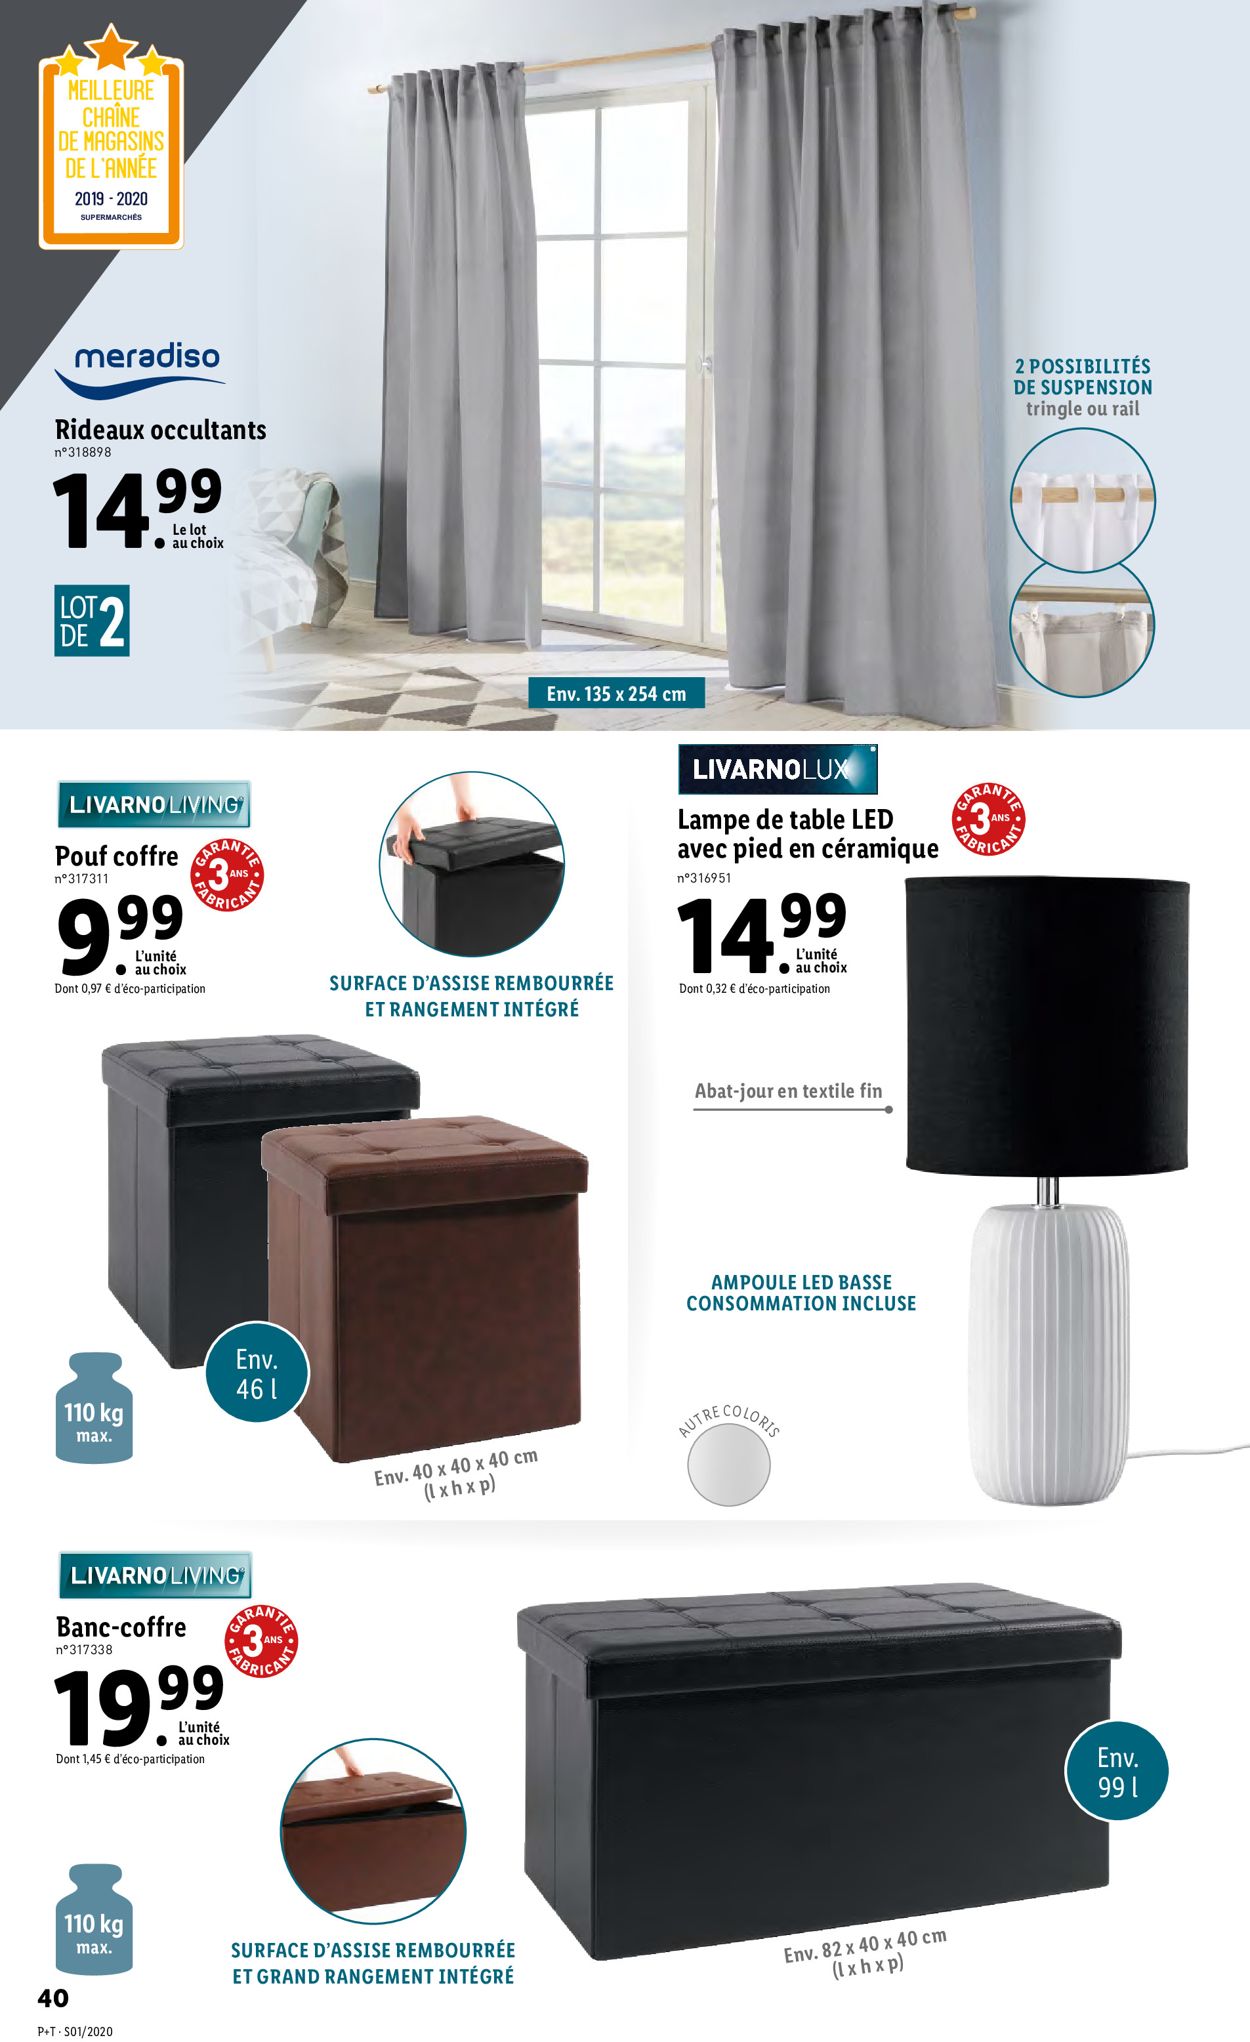 Lidl Catalogue - 02.01-07.01.2020 (Page 40)